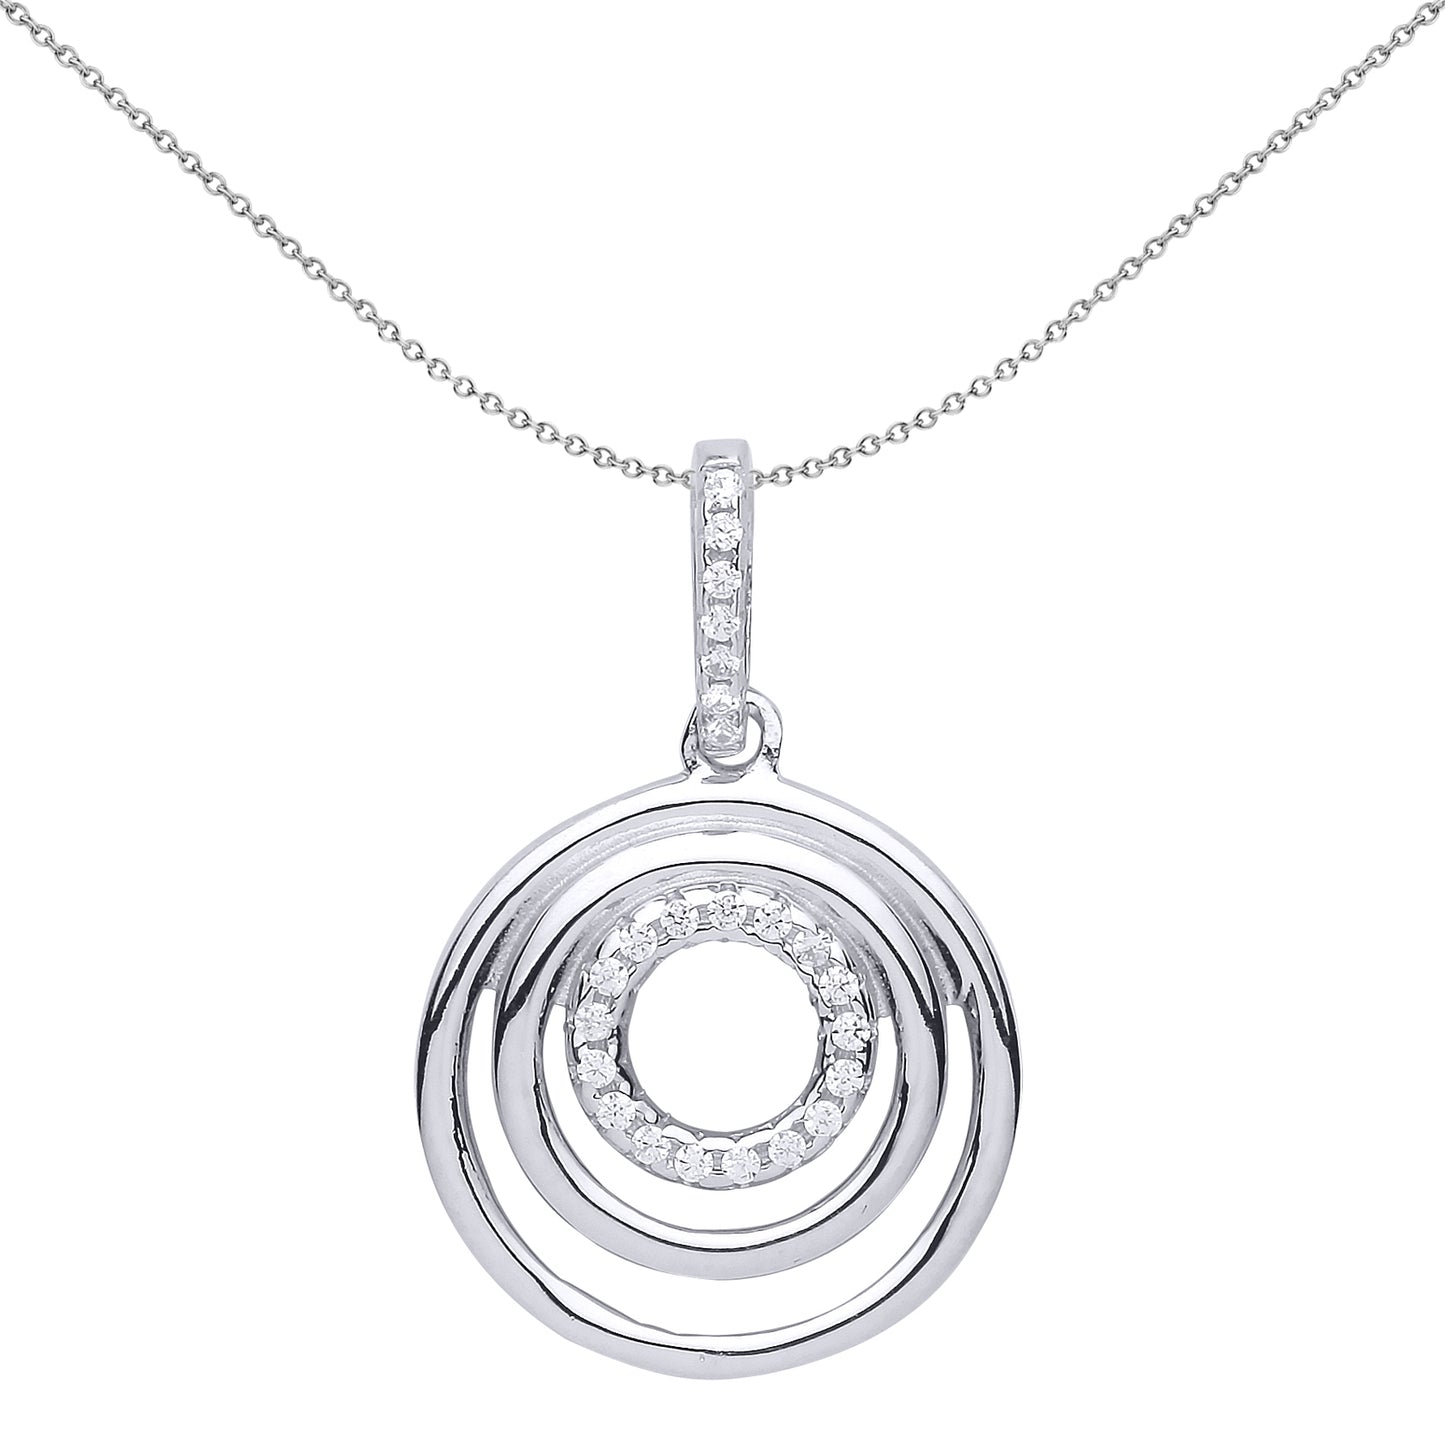 Silver  CZ Tunnel Rings Halo Pendant Necklace 18 inch - GVP514